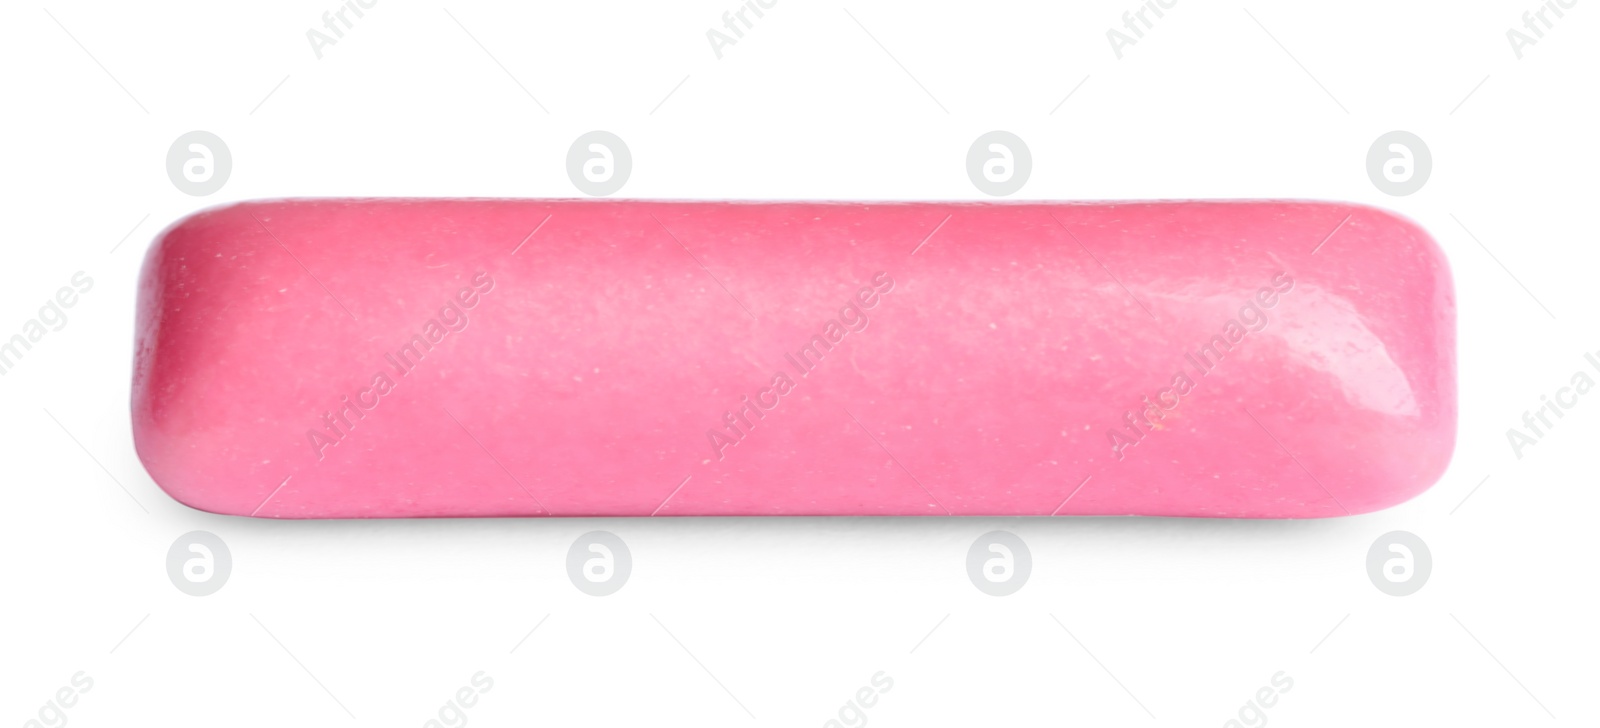 Photo of One tasty bubble gum isolated on white